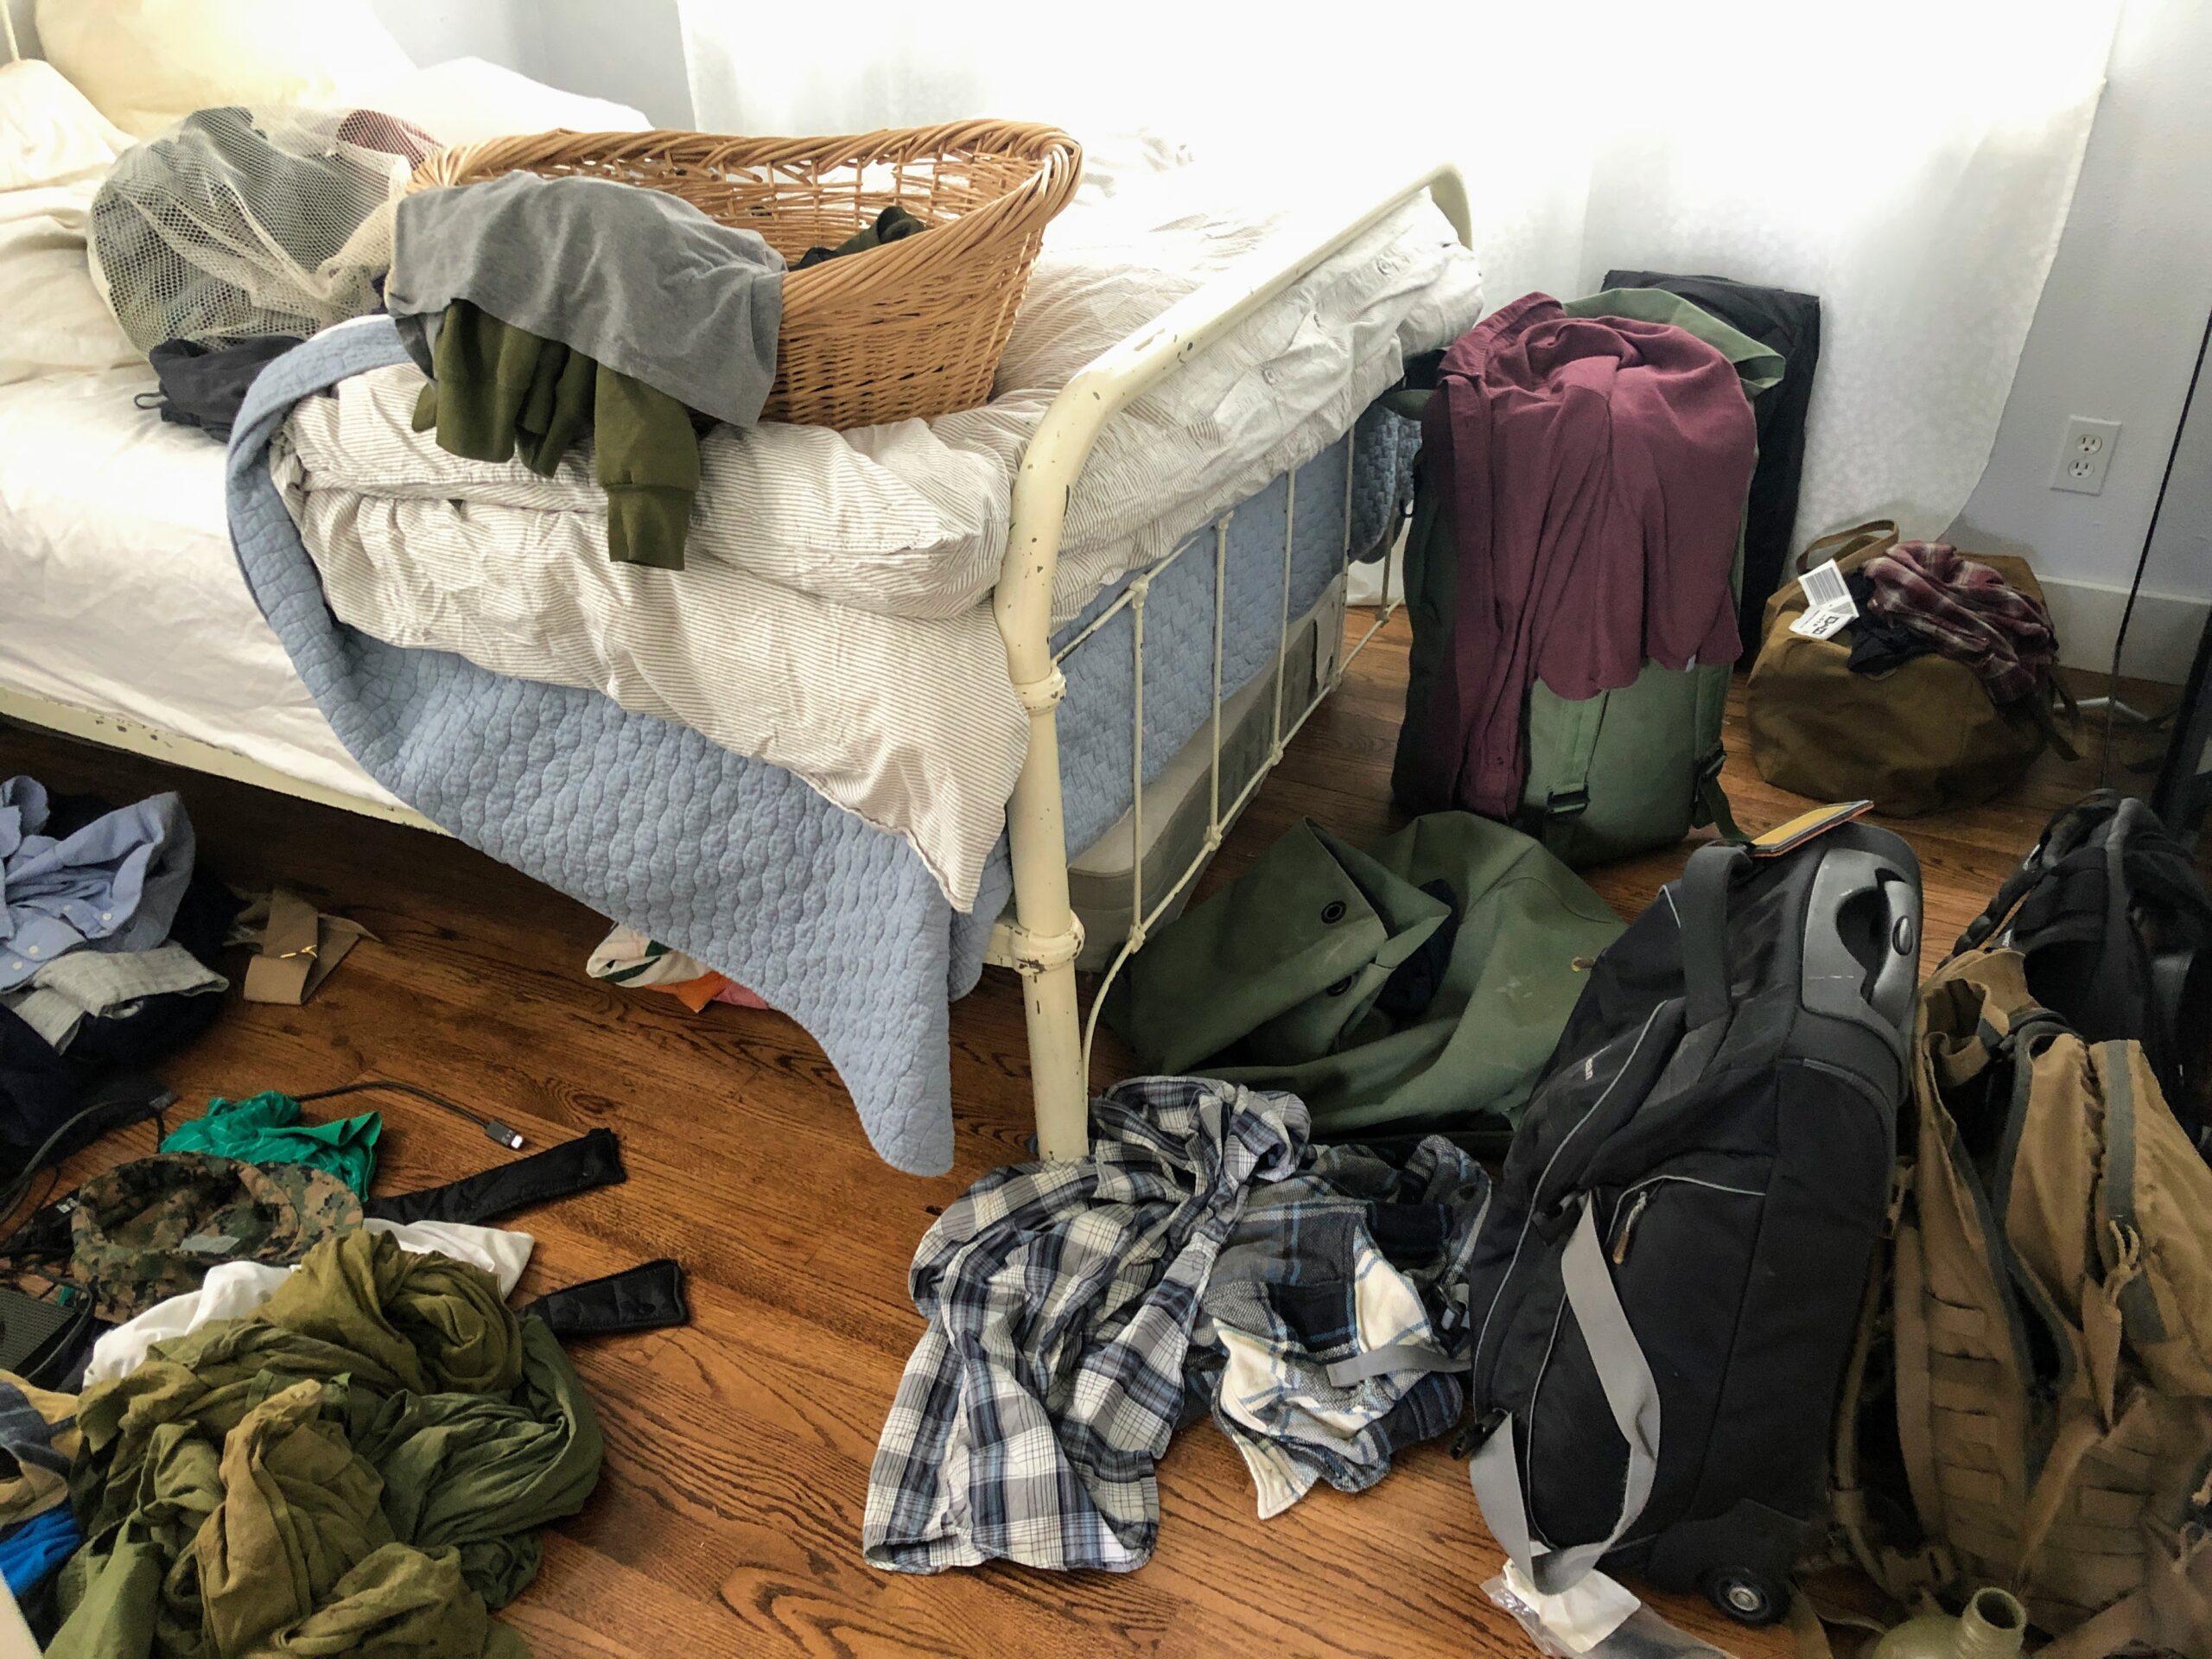 Bedroom strewn with clothing and other items.